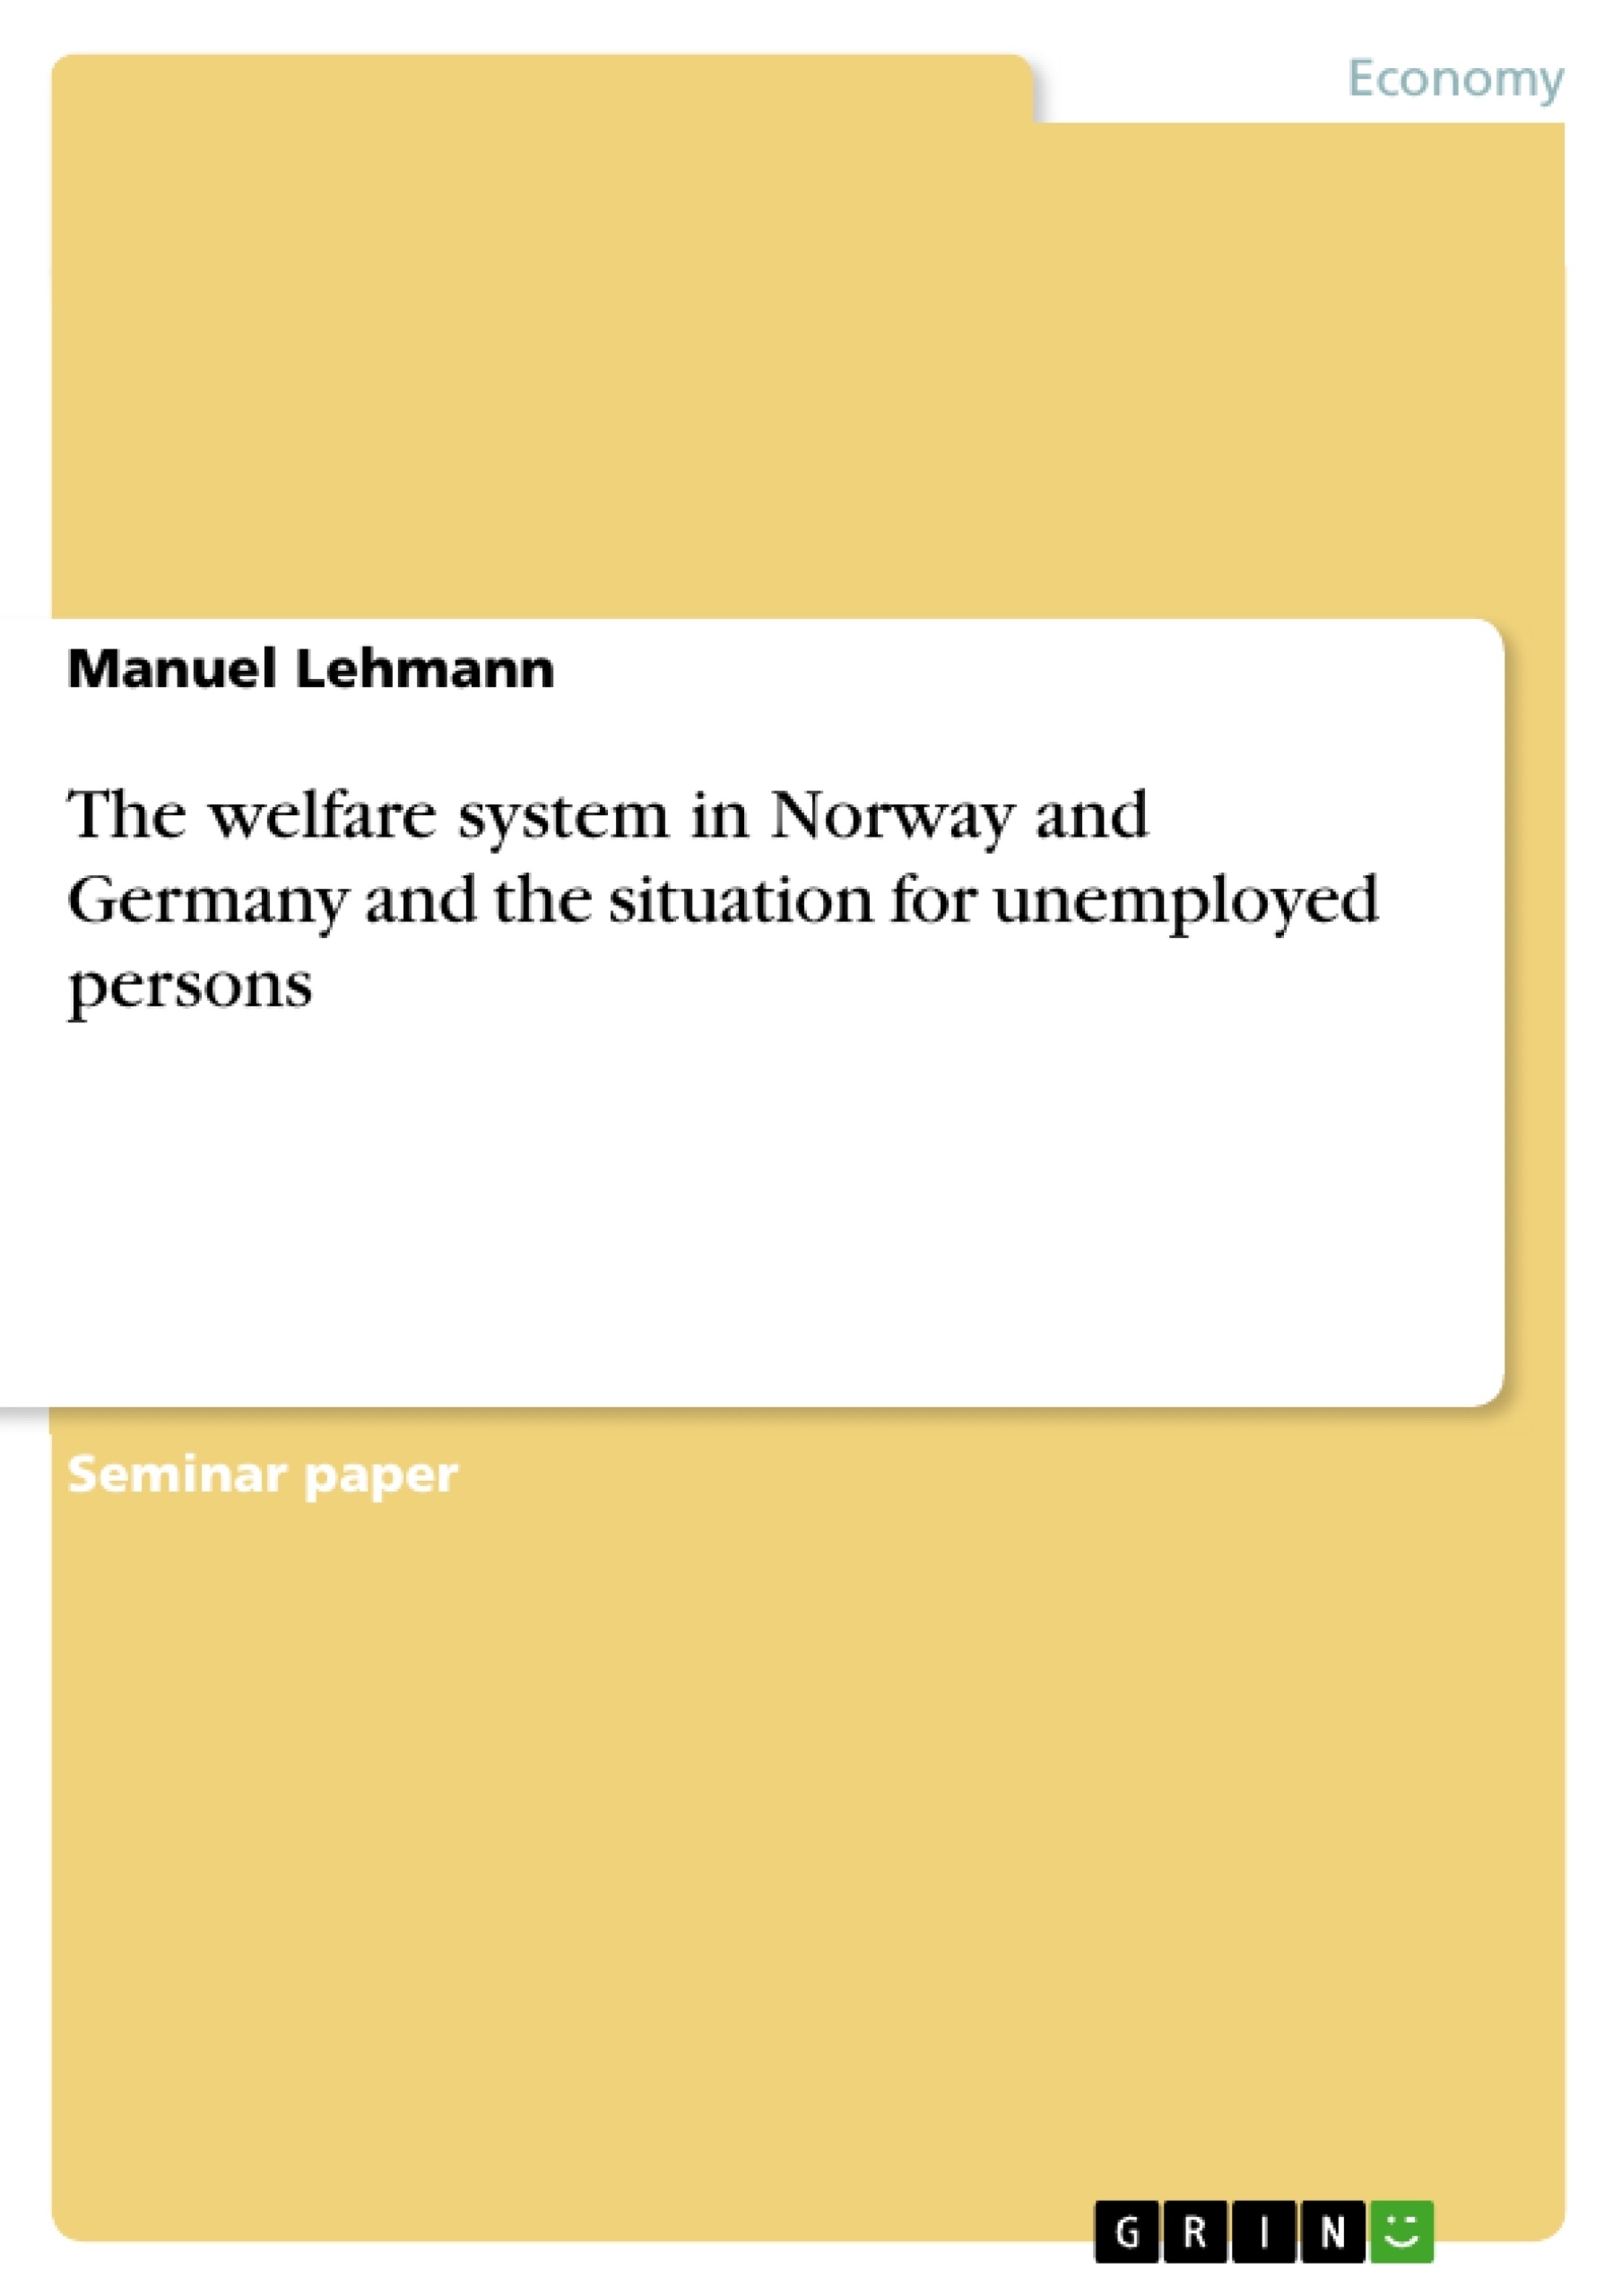 Titre: The welfare system in Norway and Germany and the situation for unemployed persons